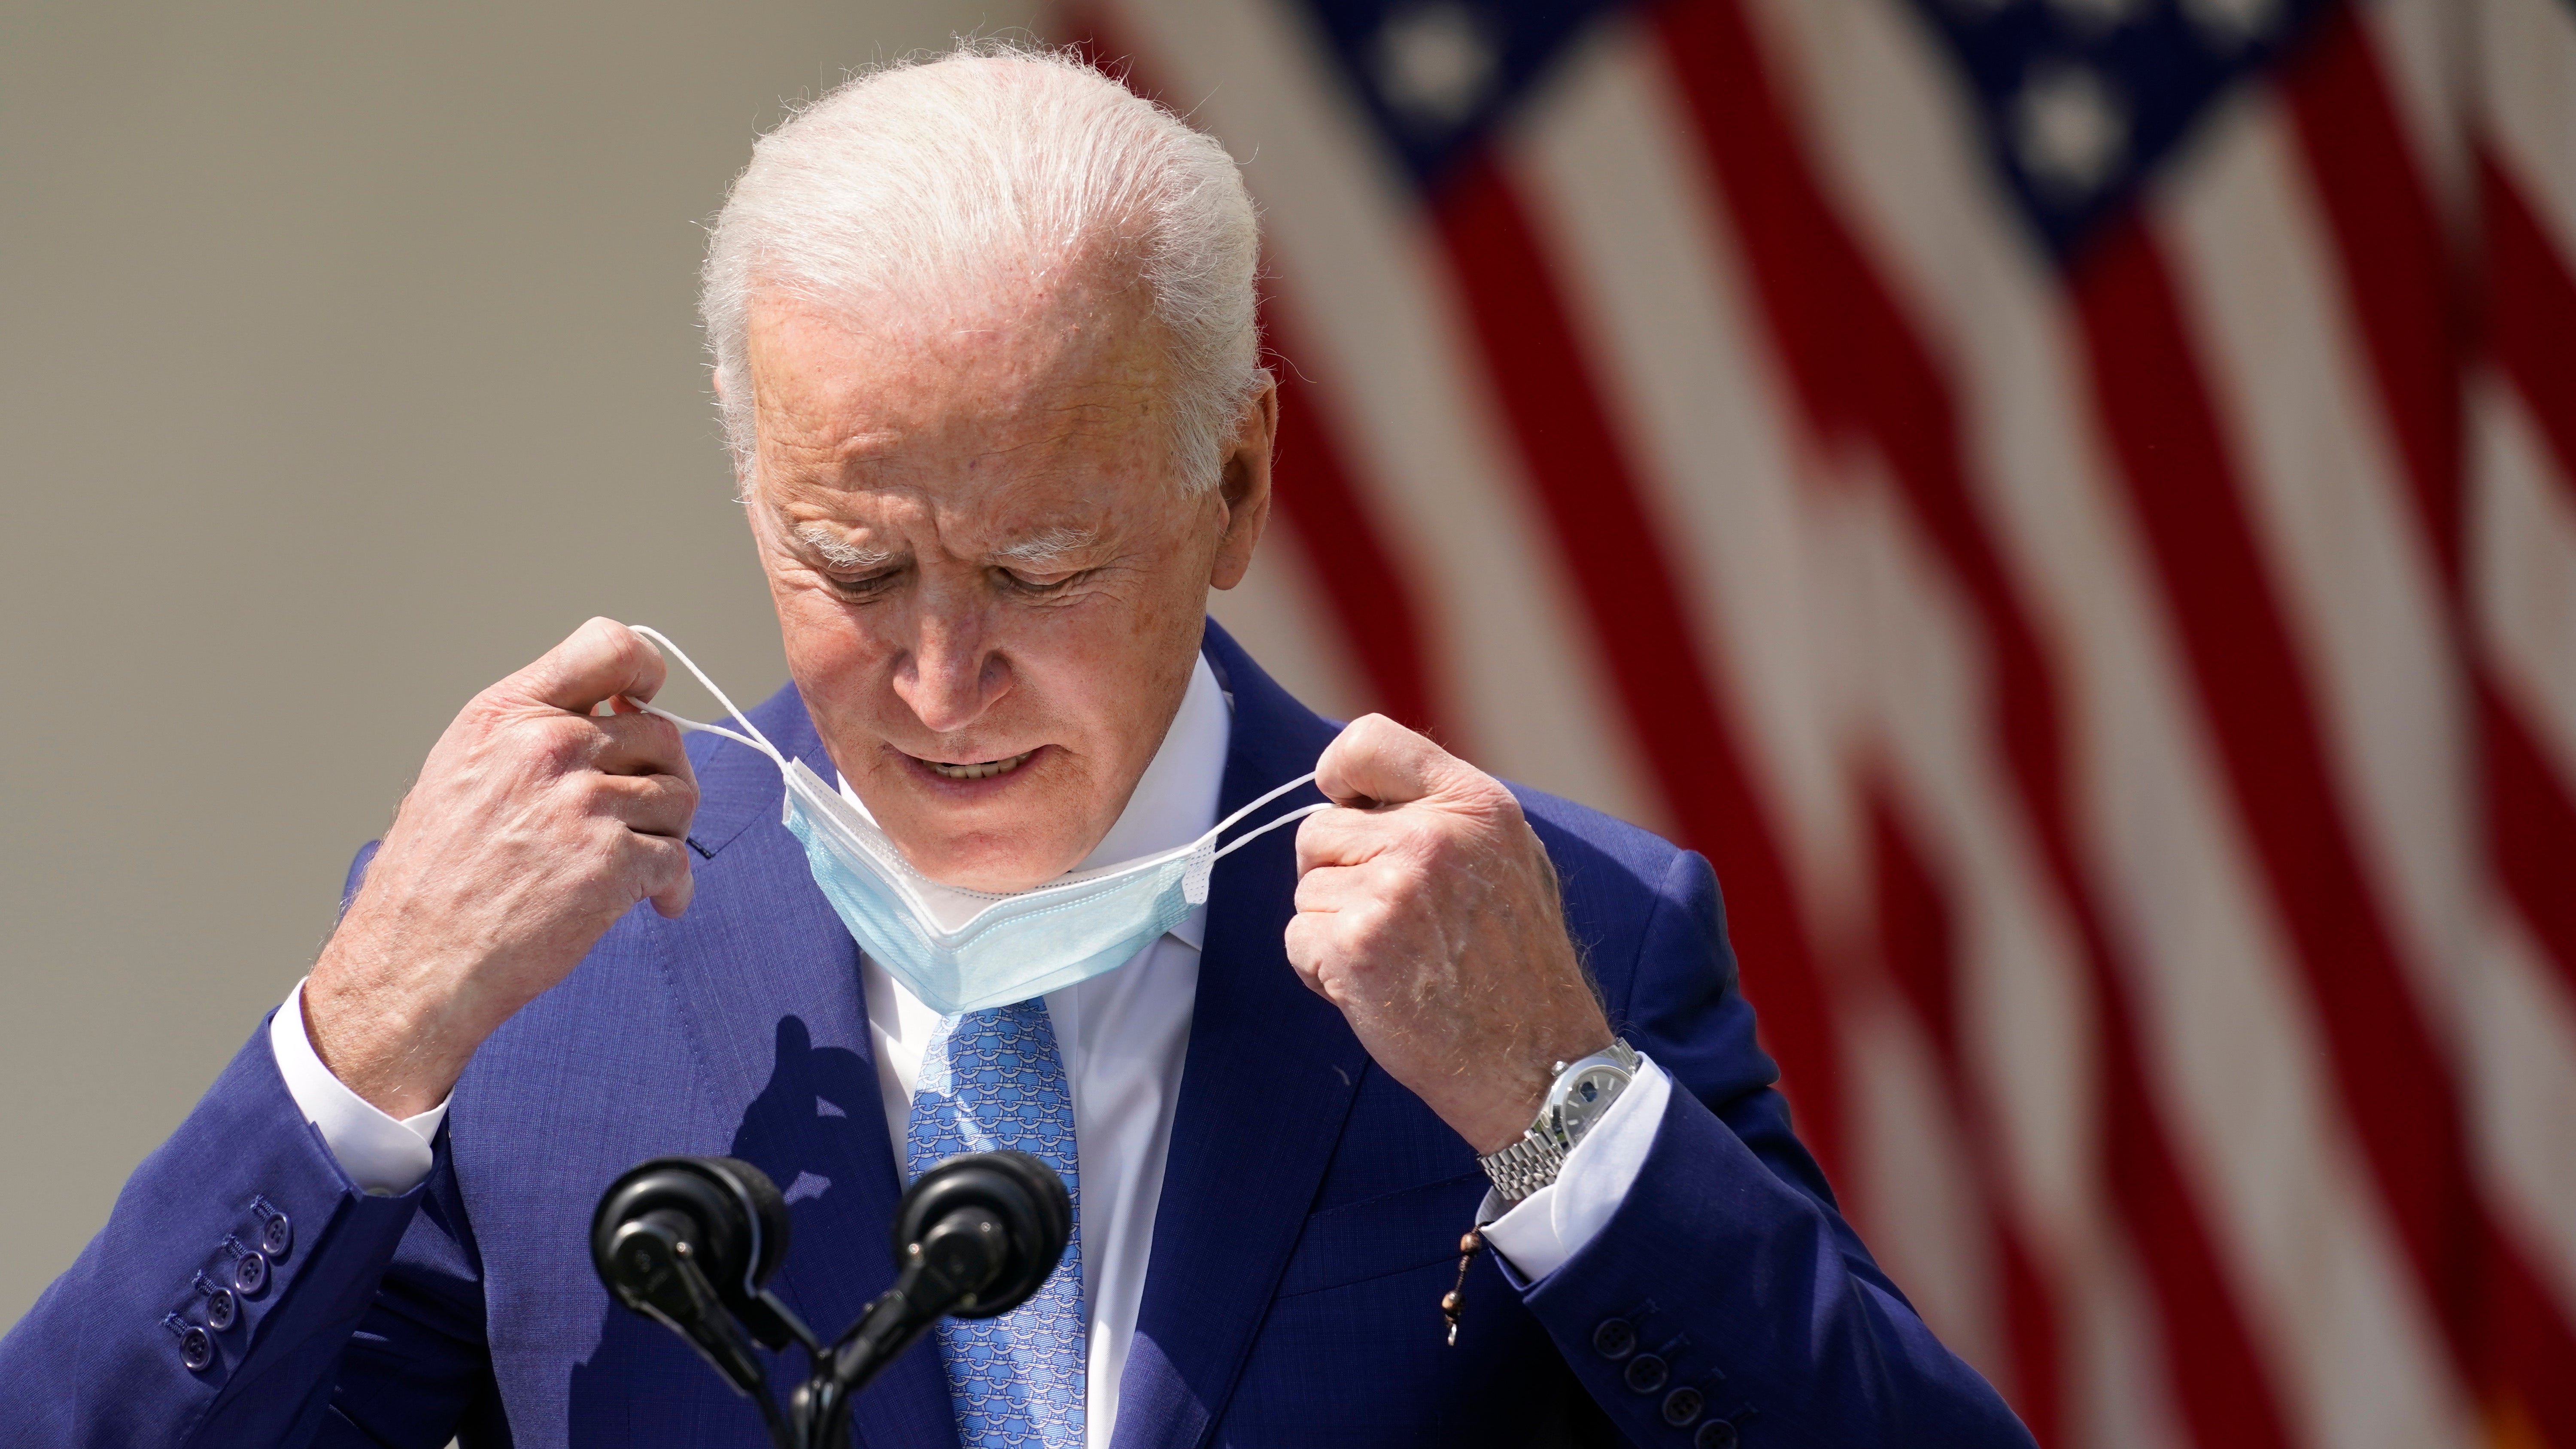 Governors caught flatfooted by Biden's mask reversal